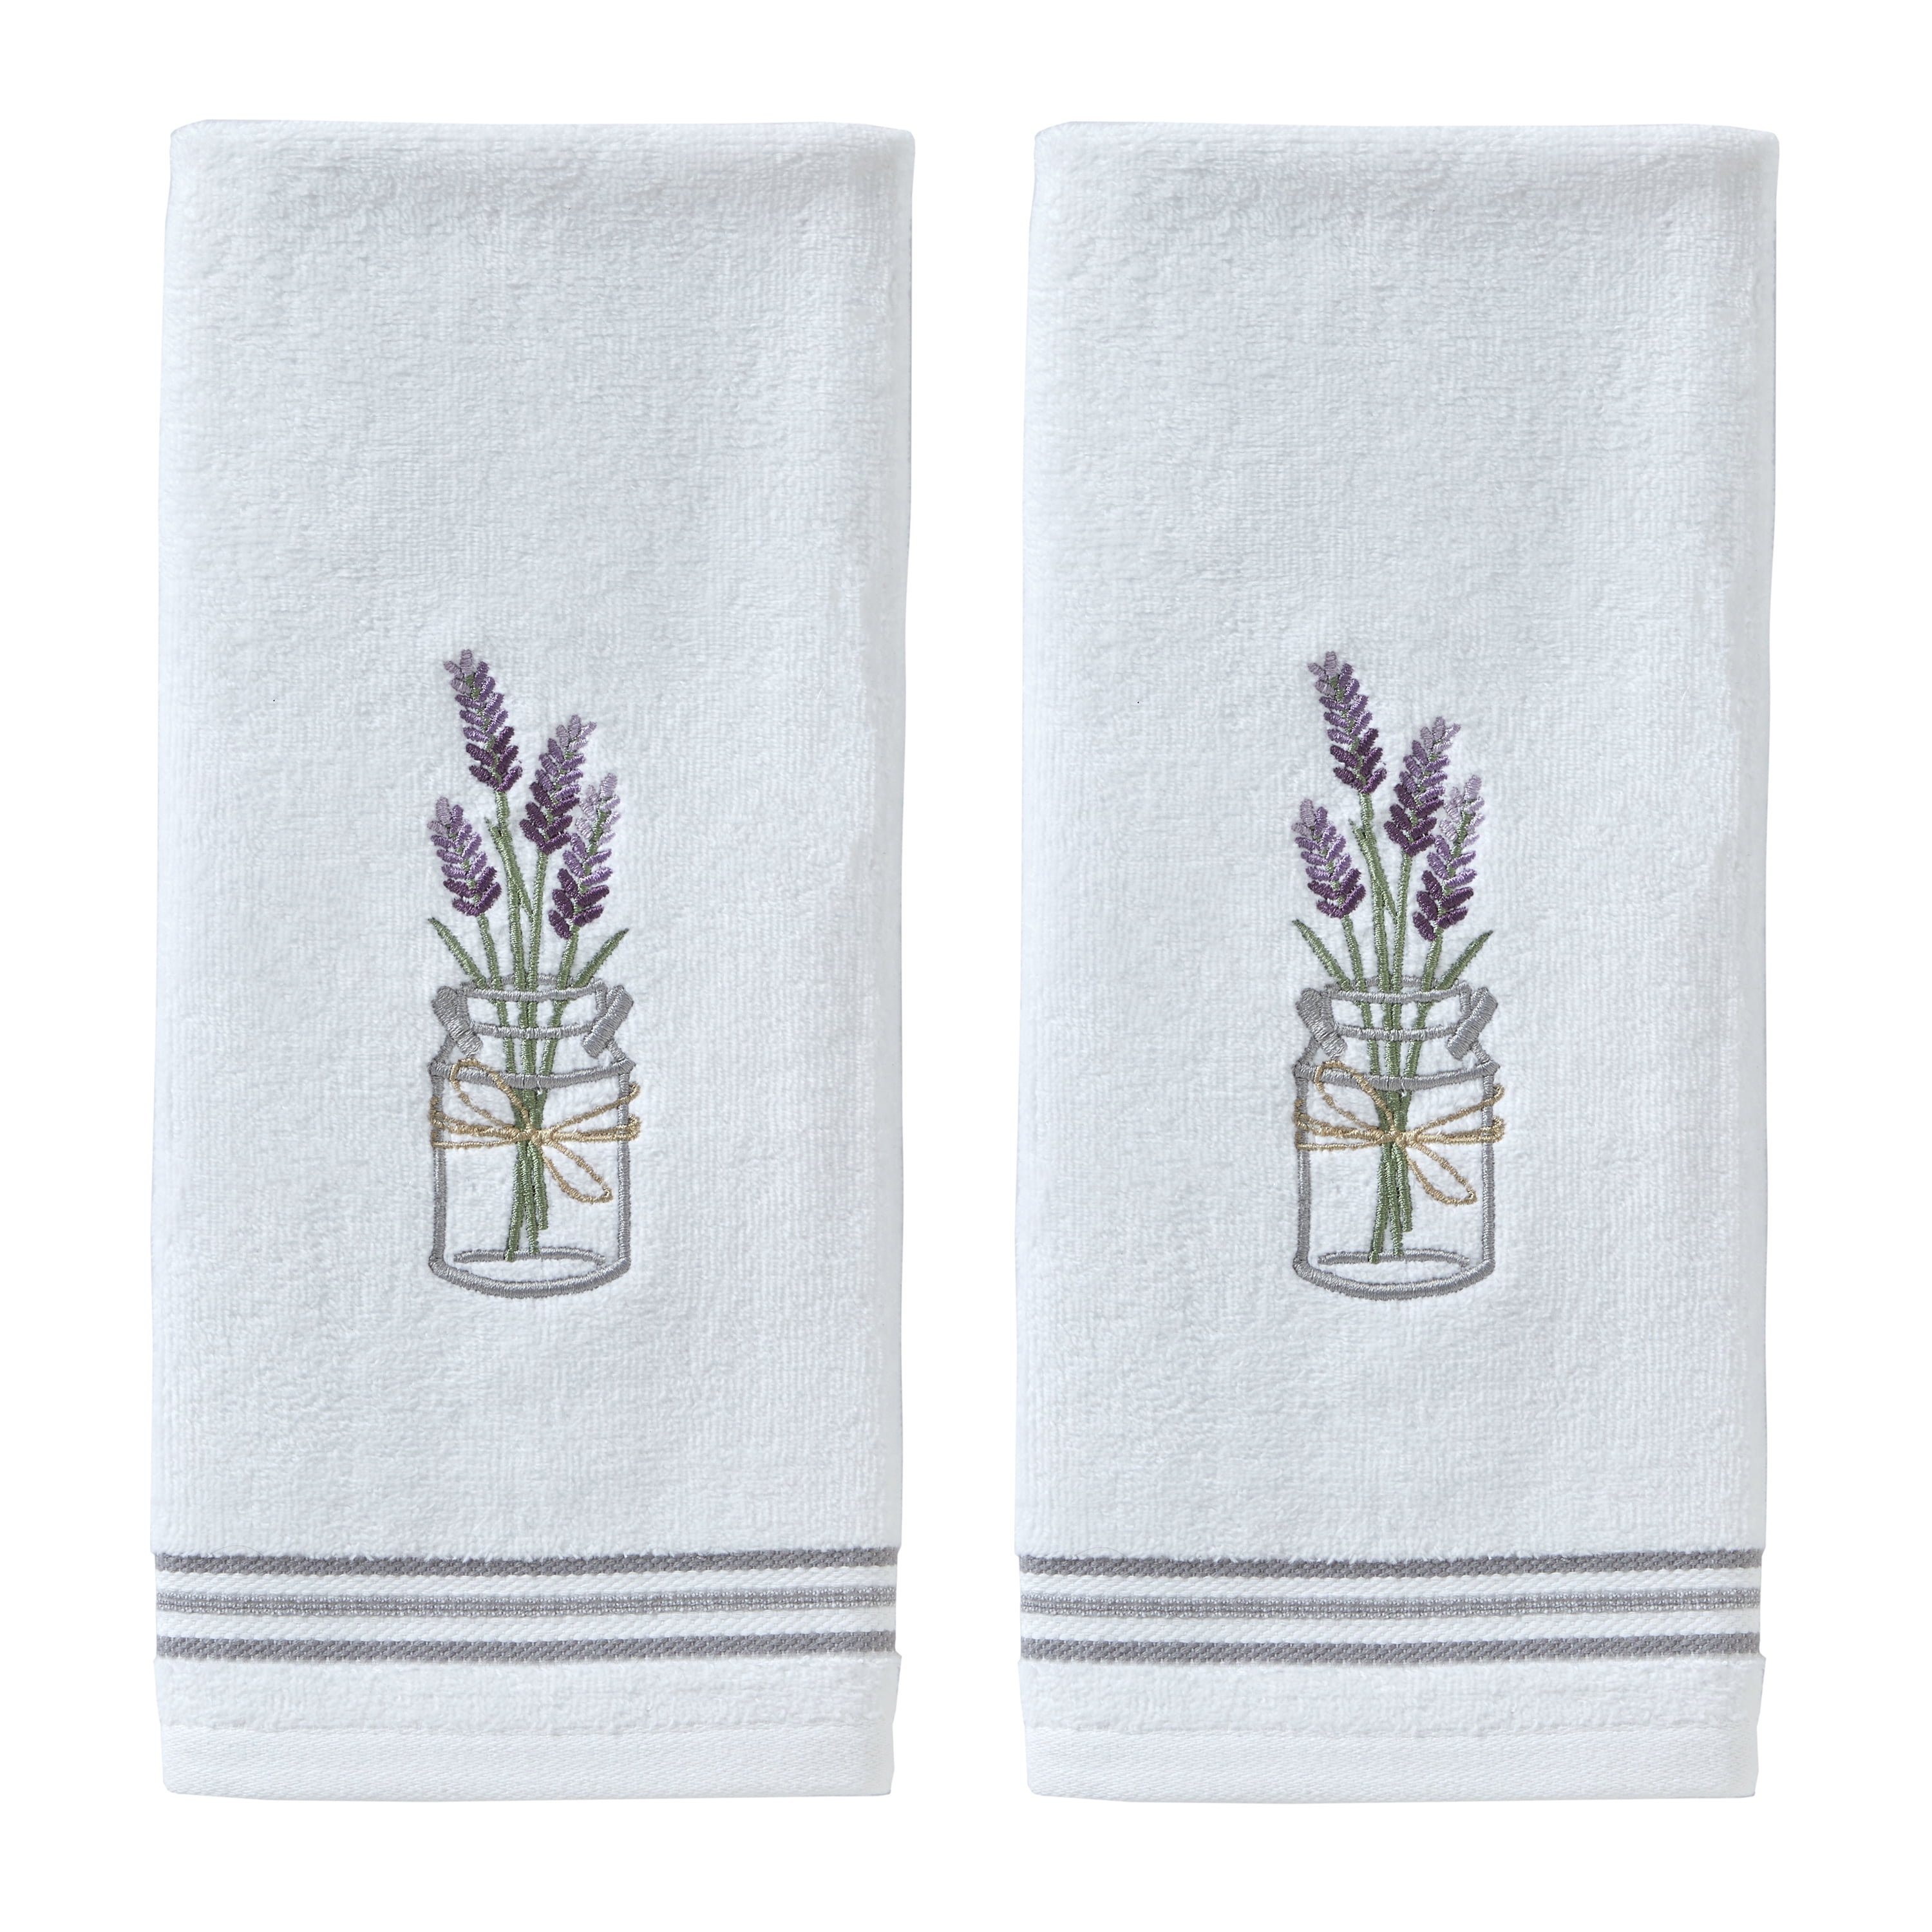 15 x 30 inches Beautiful Lavender Flowers Purple Decorative Fingertip Towels for Hotel Kitchen Spa Gym Yoga Guest Hand Towels for Bathroom 